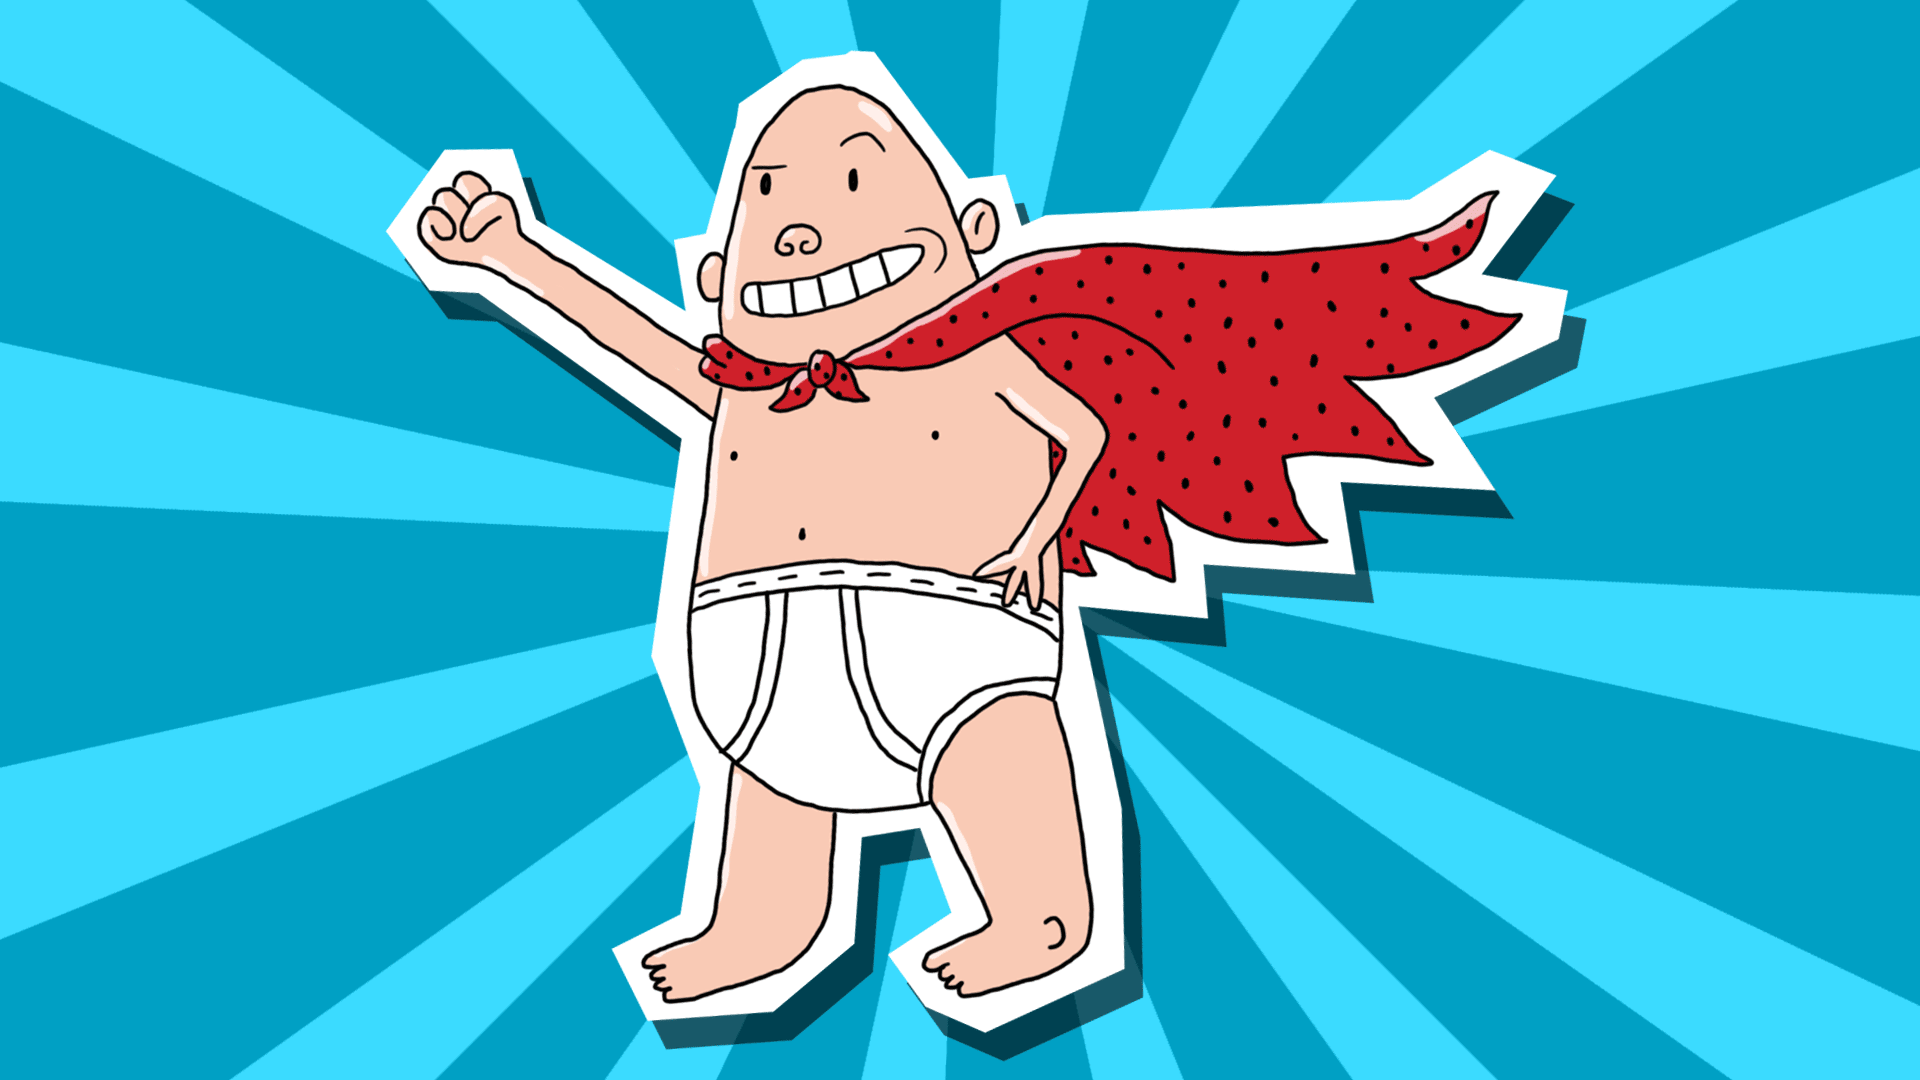 How to draw captain underpants